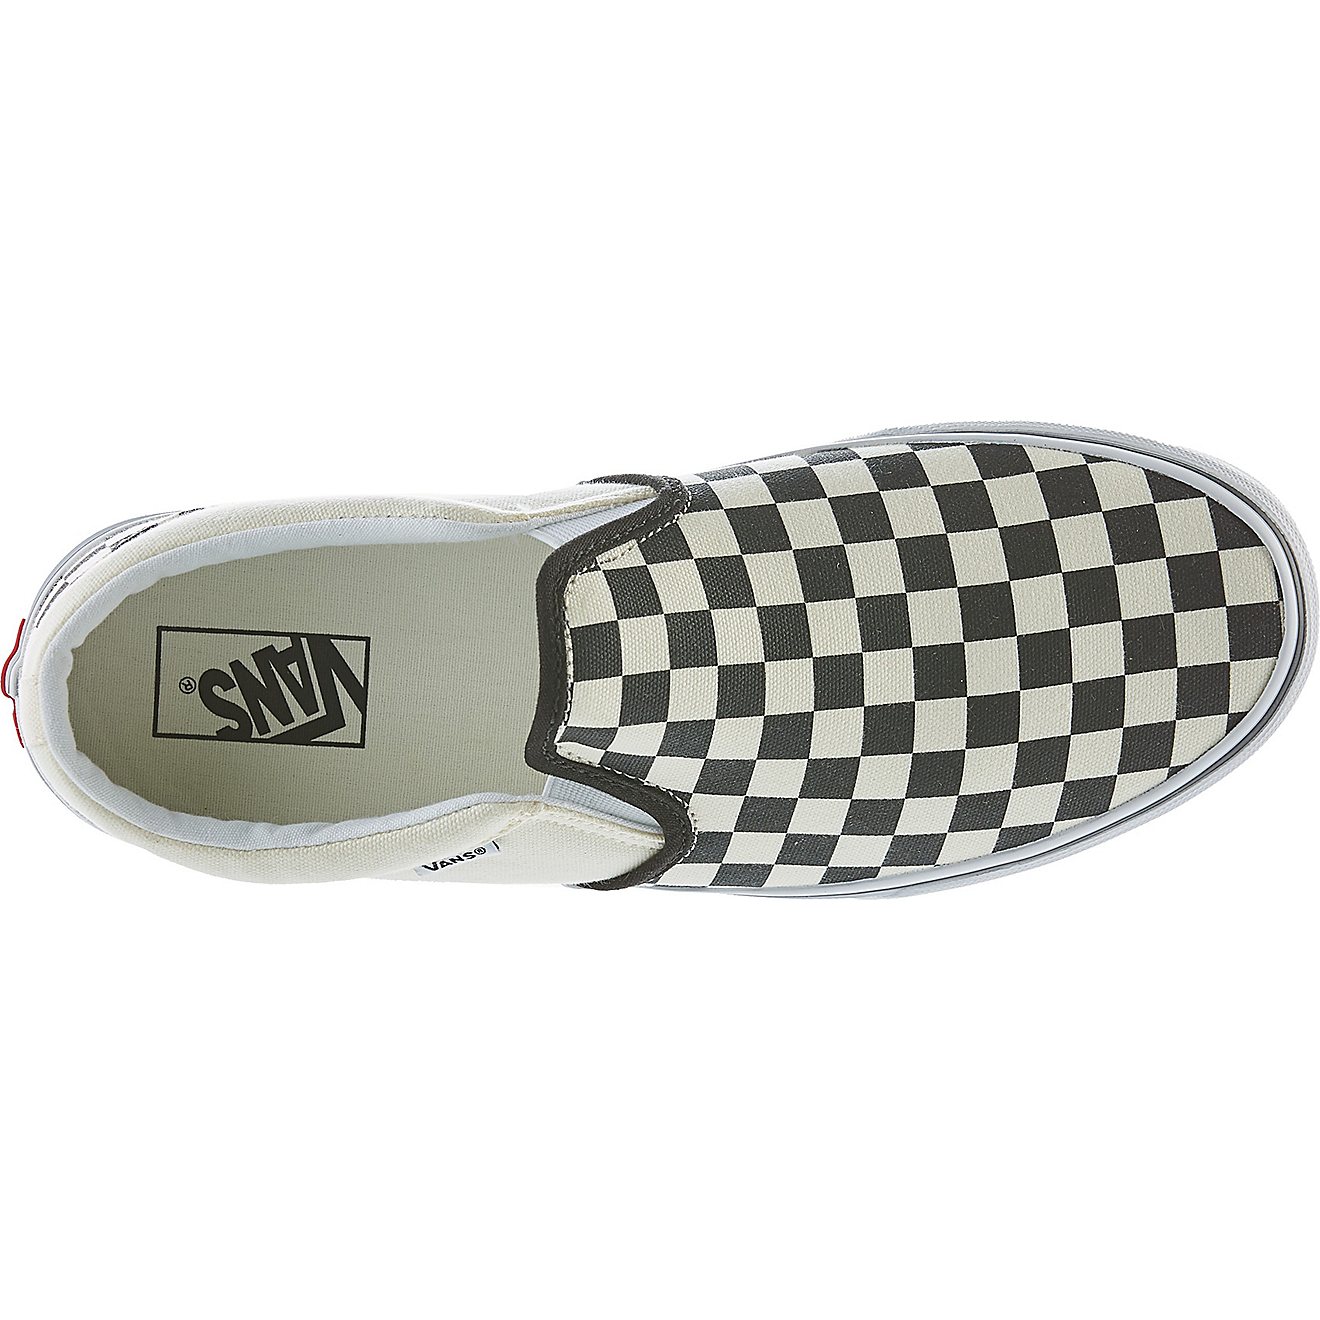 Vans Men's Asher Slip-on Shoes | Free Shipping at Academy